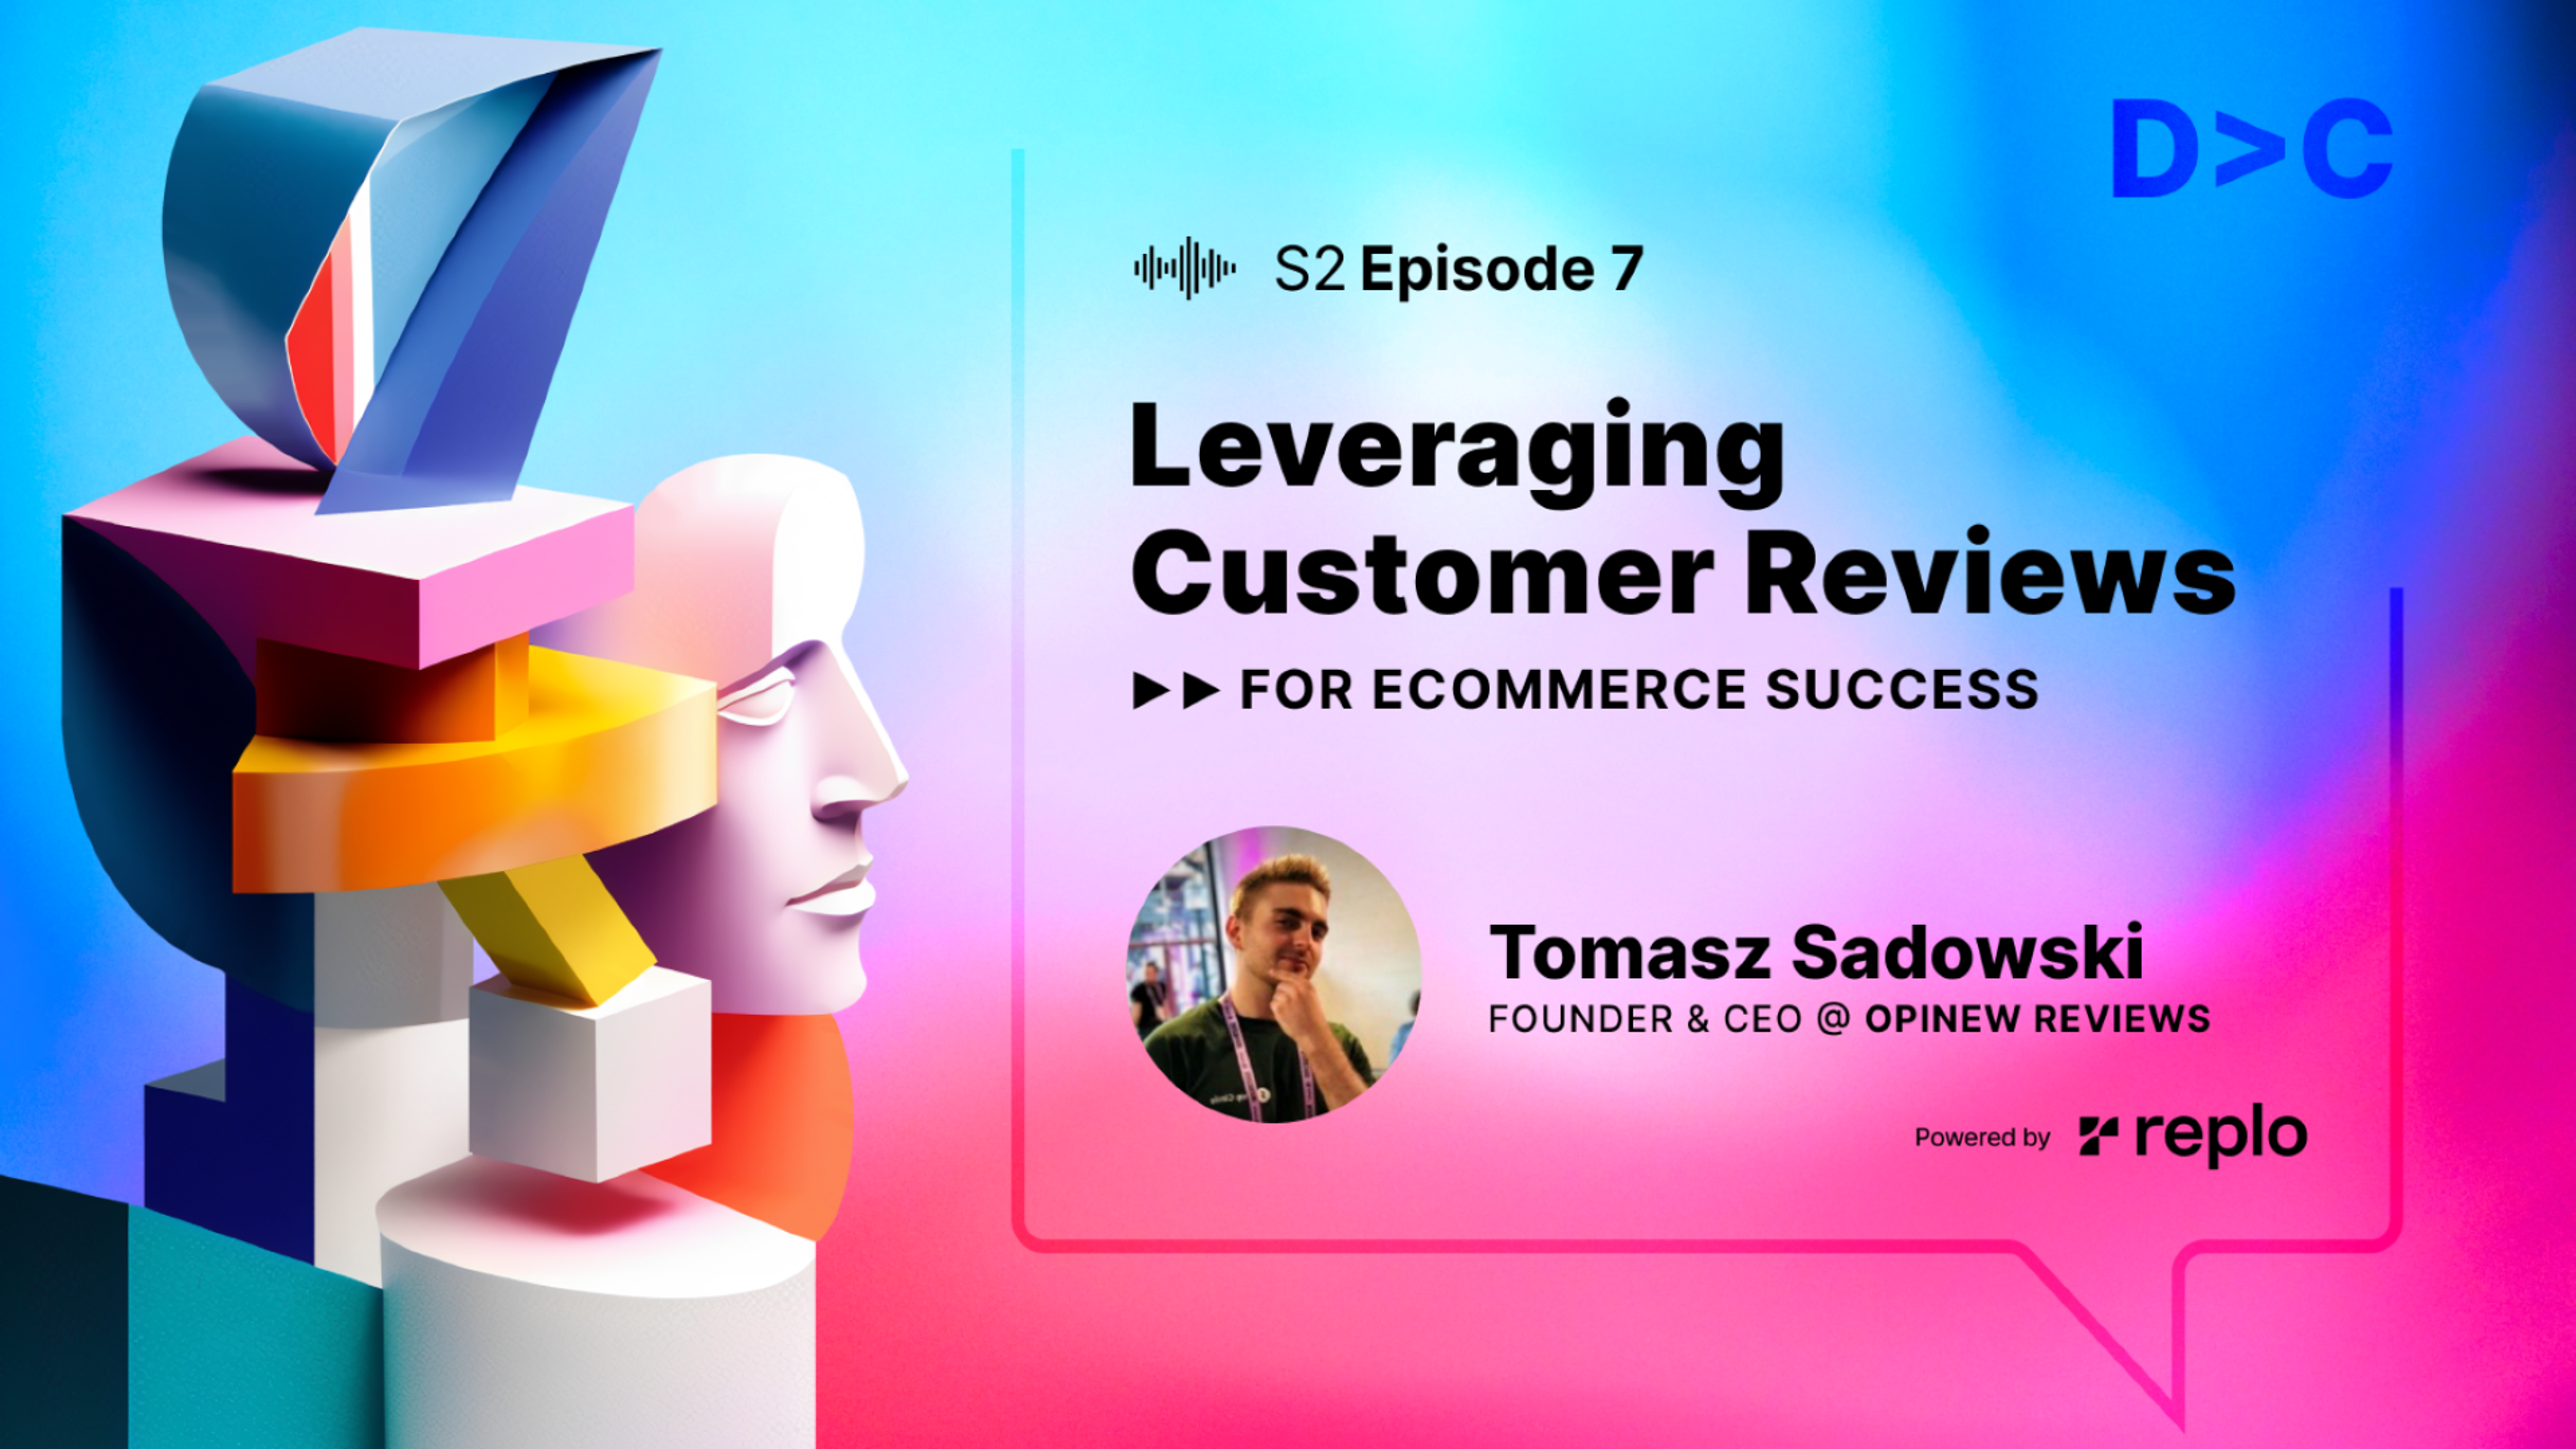 Leveraging Customer Reviews For eCommerce Success with Opinew's Tomasz Sadowski